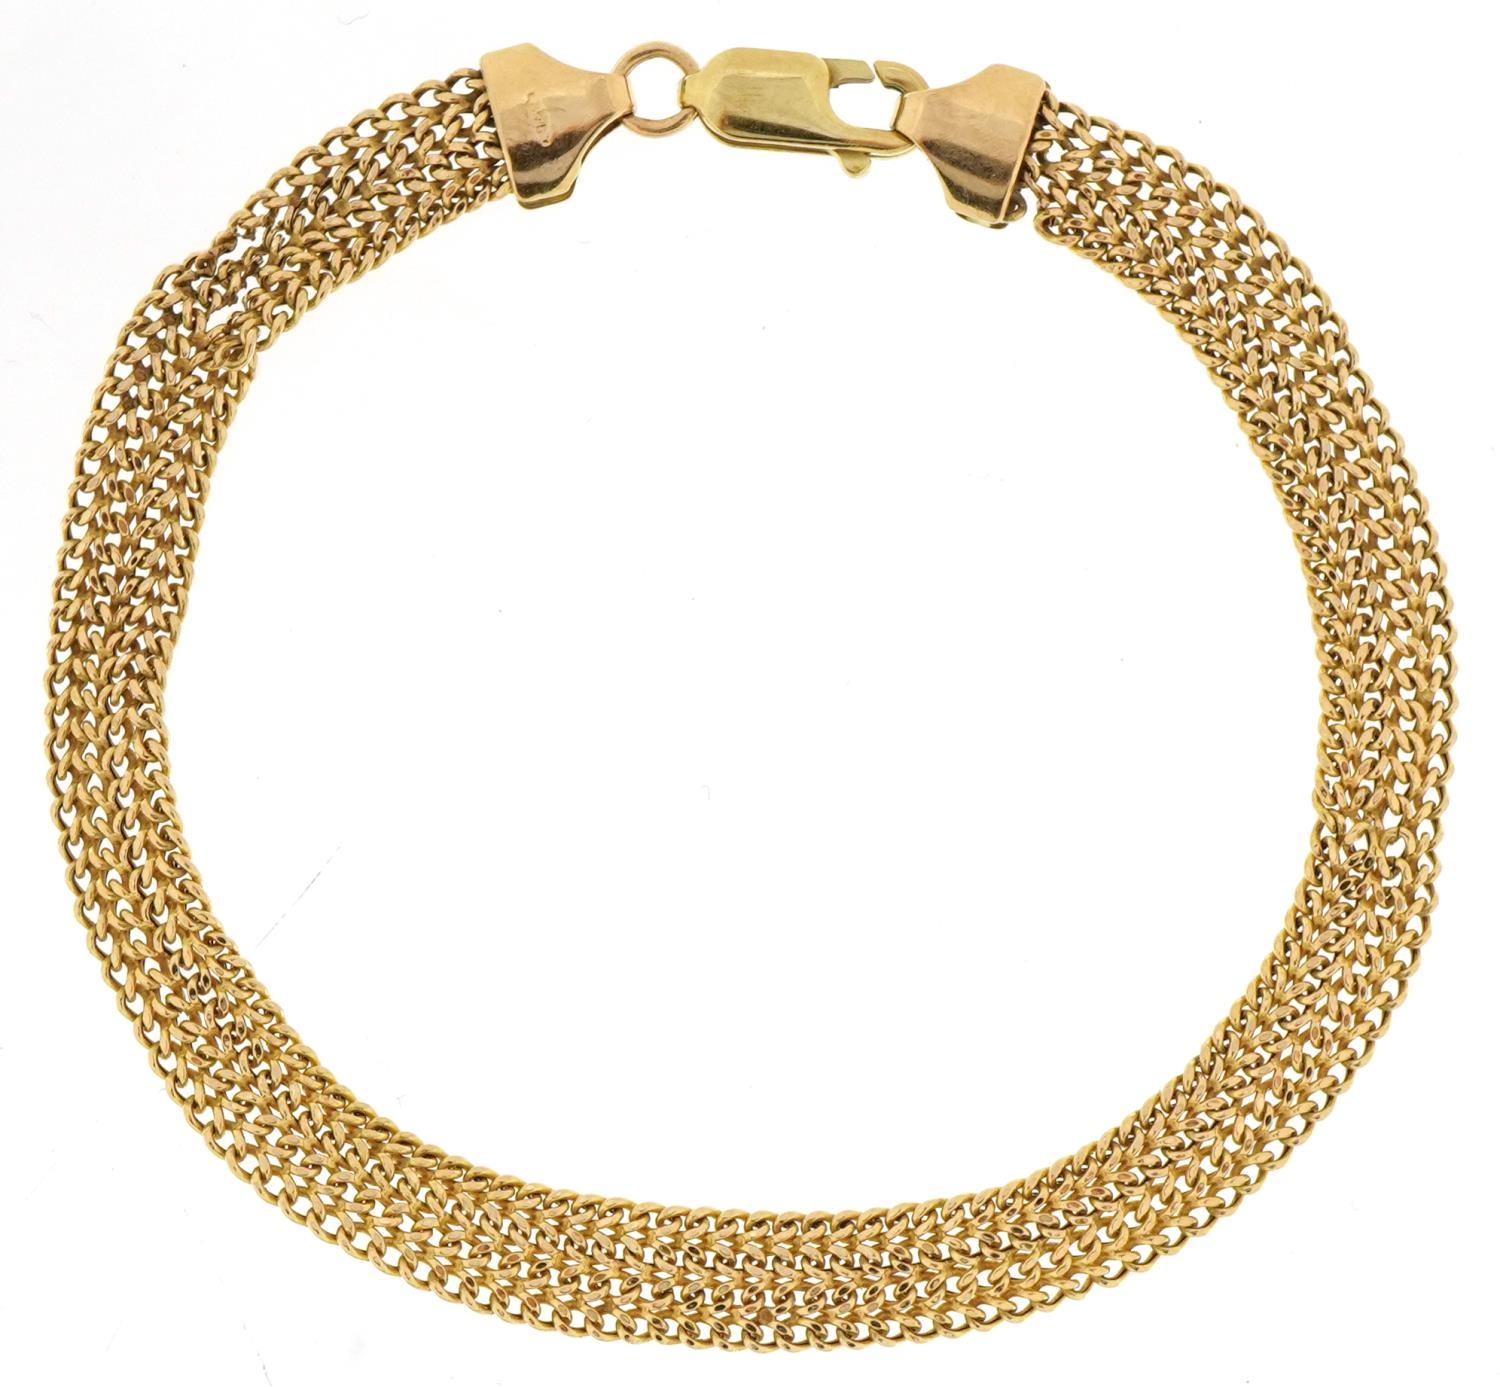 9ct gold curb link four row bracelet, 19cm in length, 3.2g : For further information on this lot - Image 4 of 4